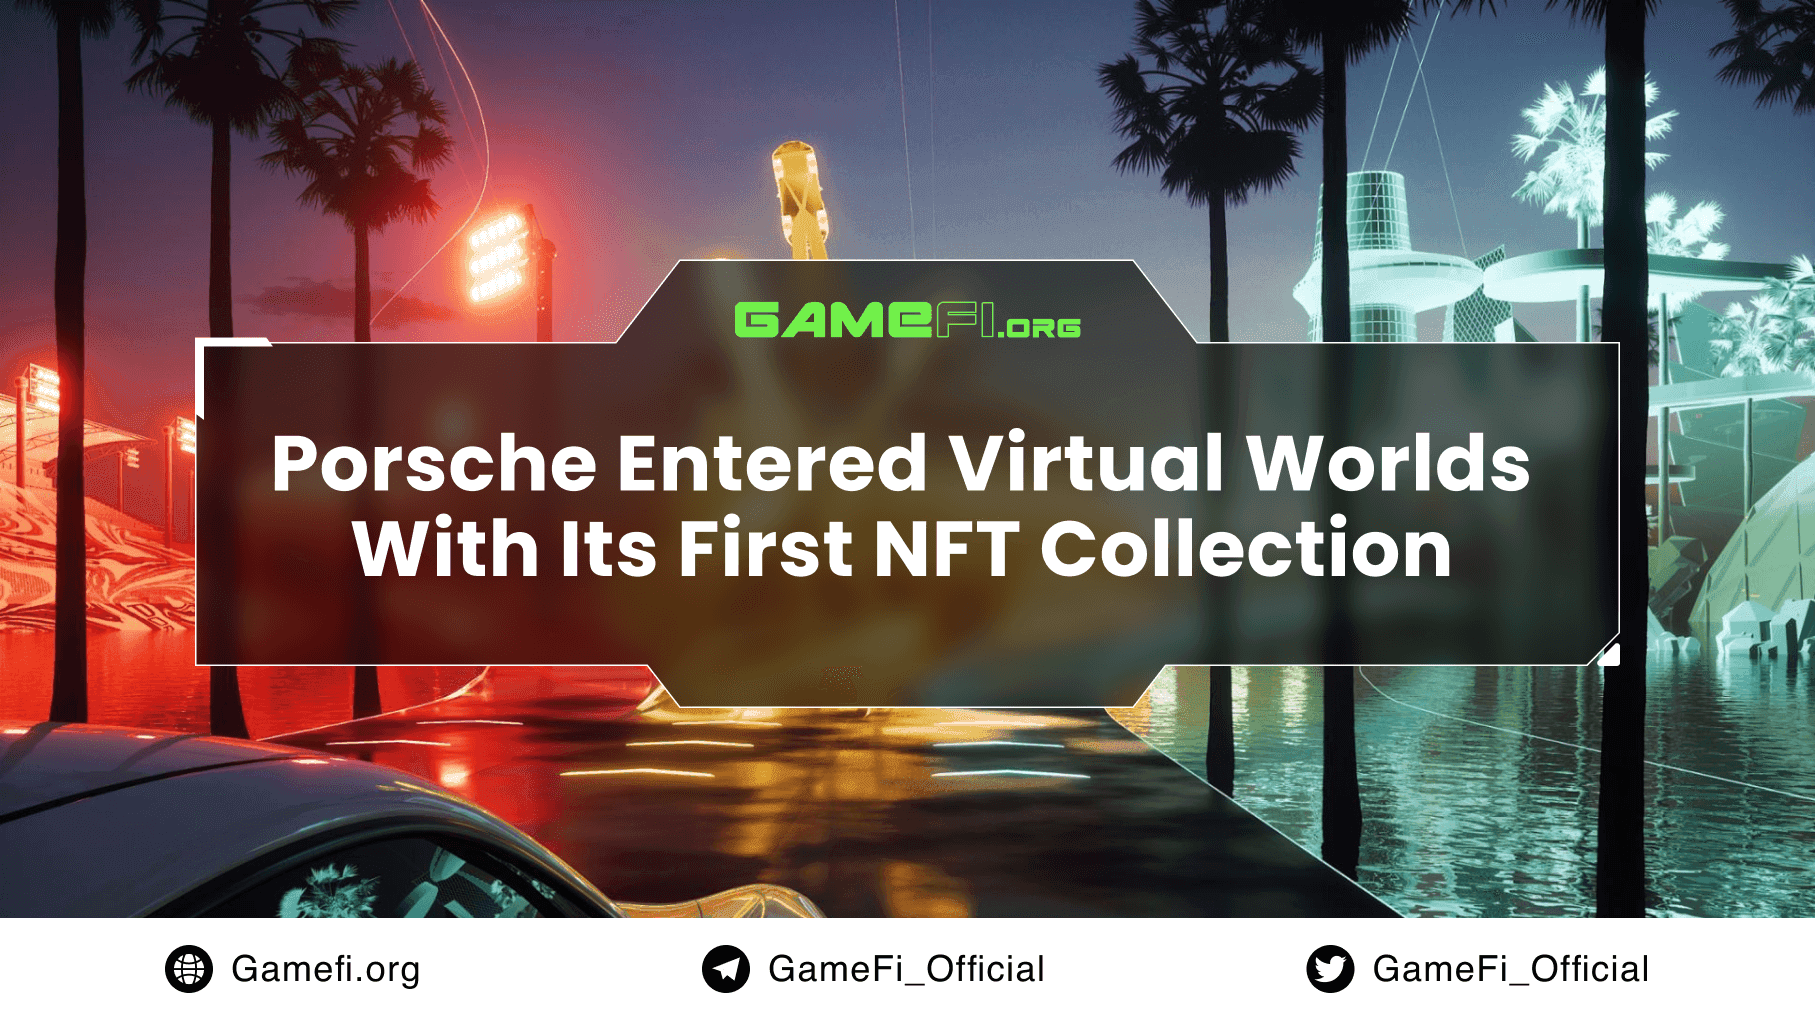 Porsche Unveils Entry Into Virtual Worlds With Its First NFT Collection